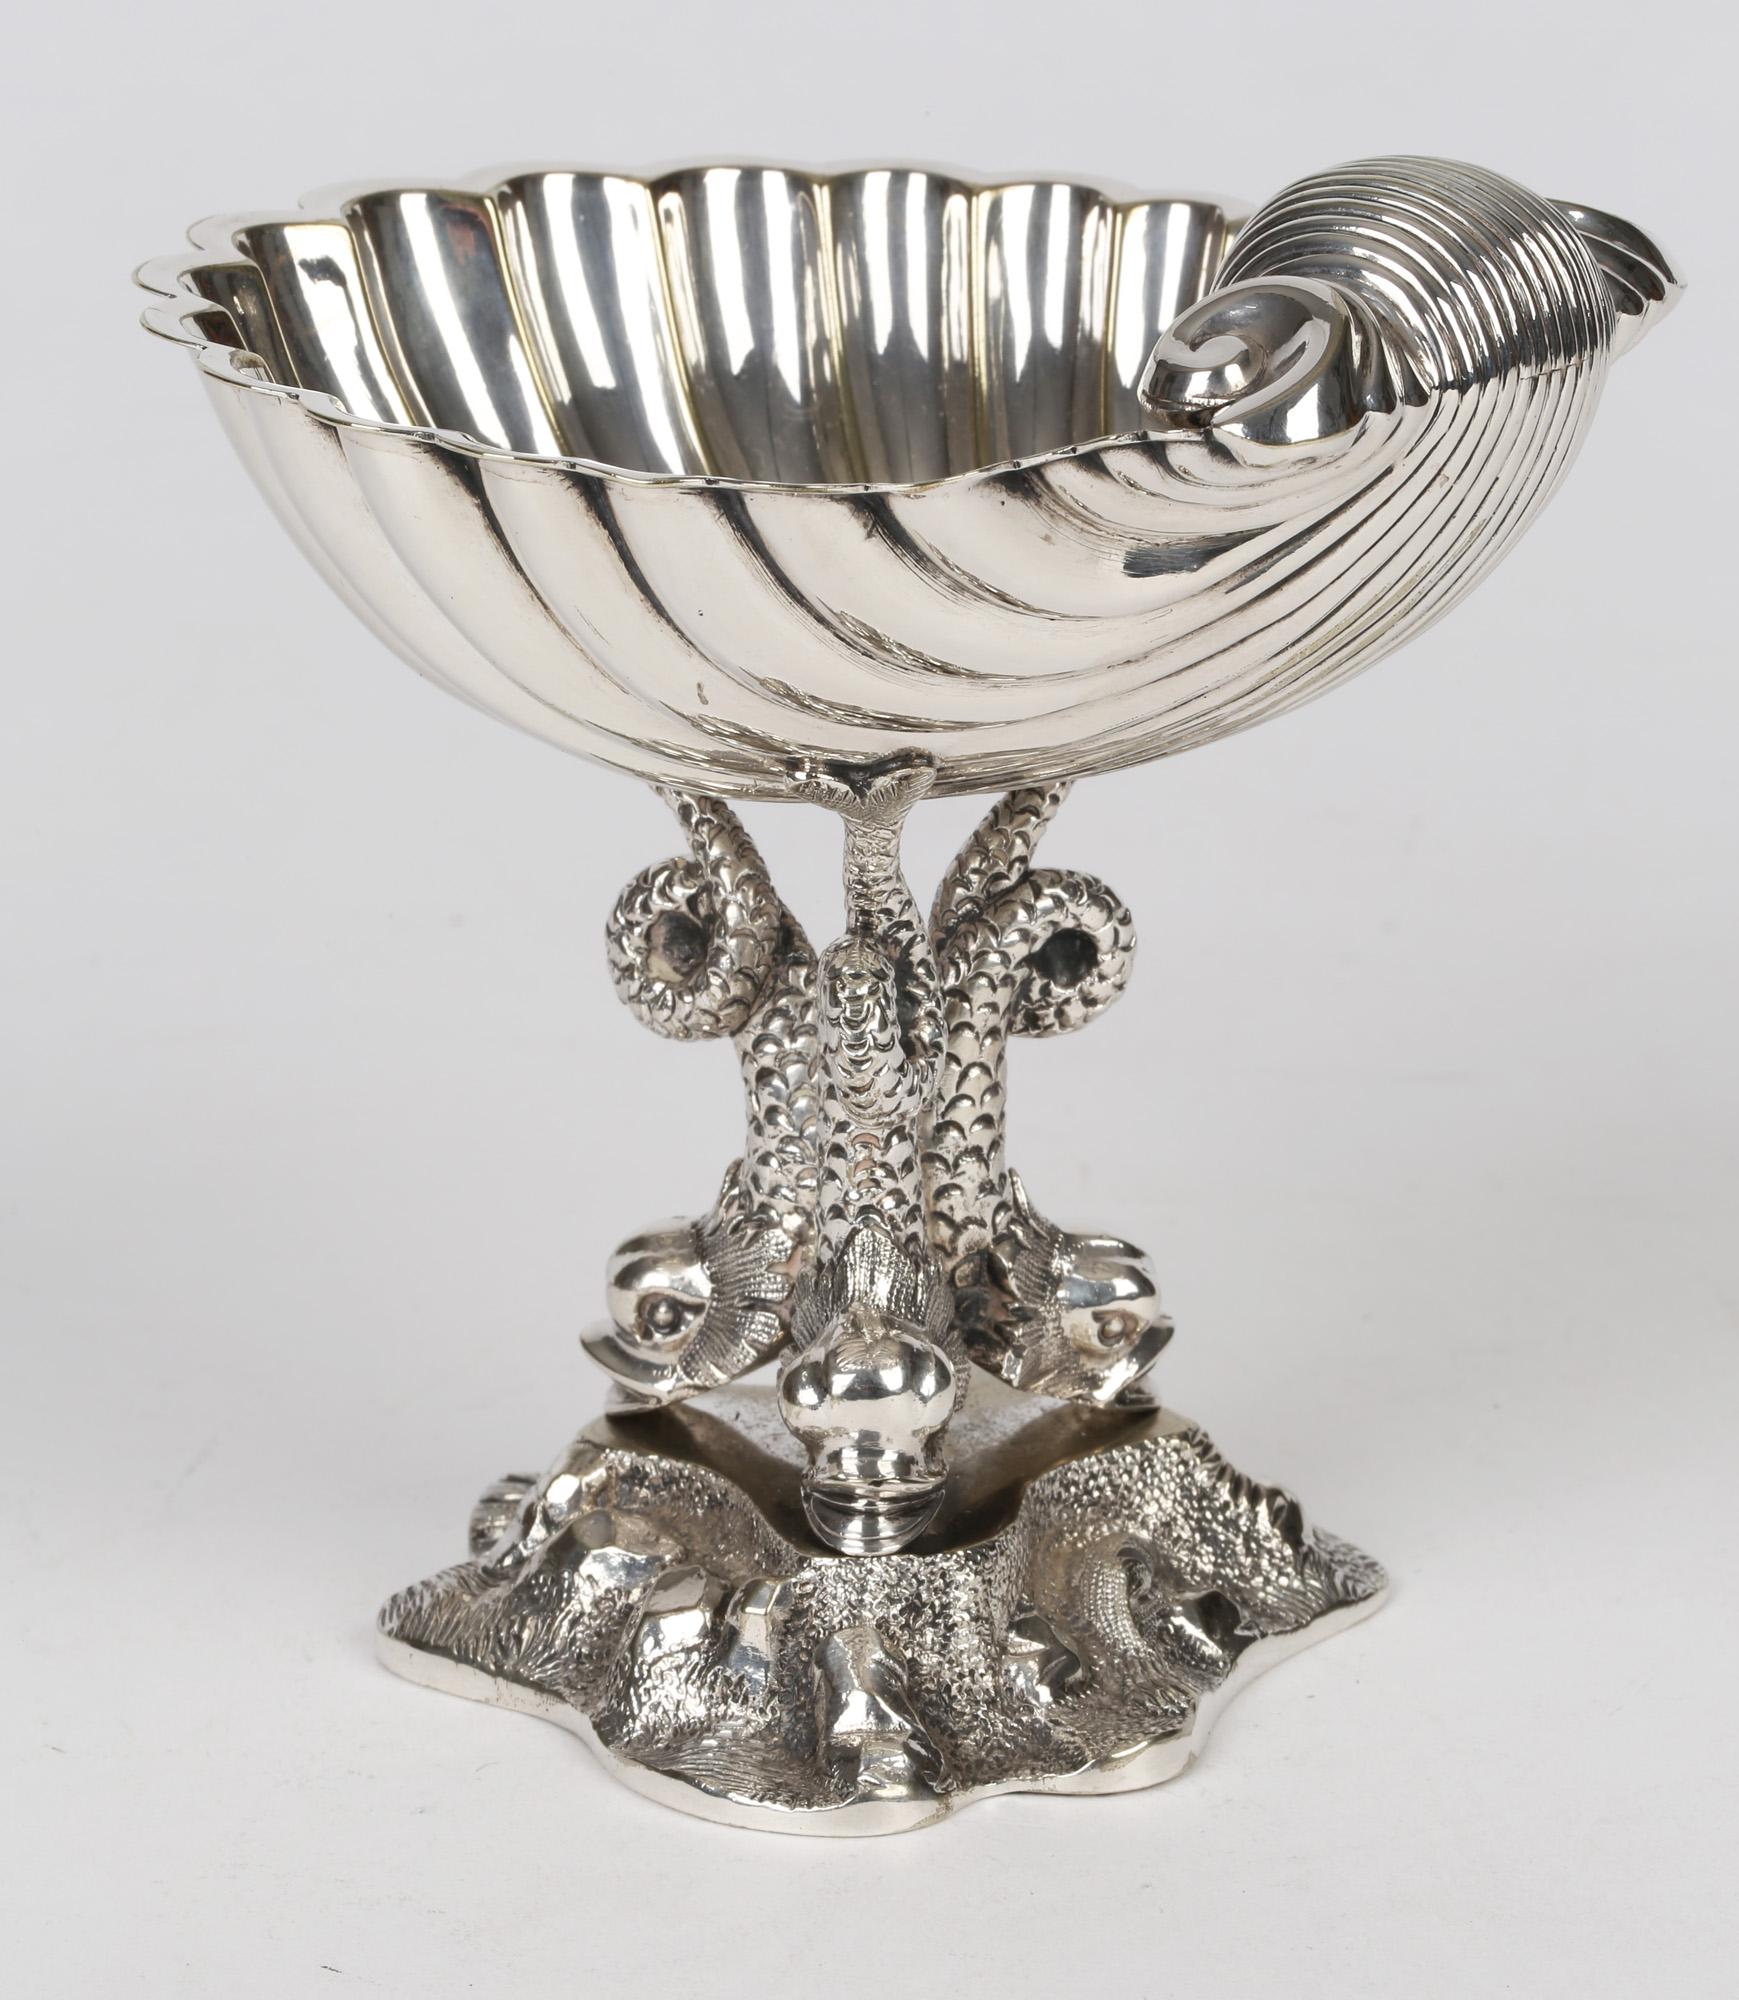 A very fine and decorative Aesthetic Movement silver plated shell shaped bon-bon dish by William Hutton and dating from around 1890. This attractive dish stands raised on a moulded leafy rocky pedestal base with three dolphin supports with the dish